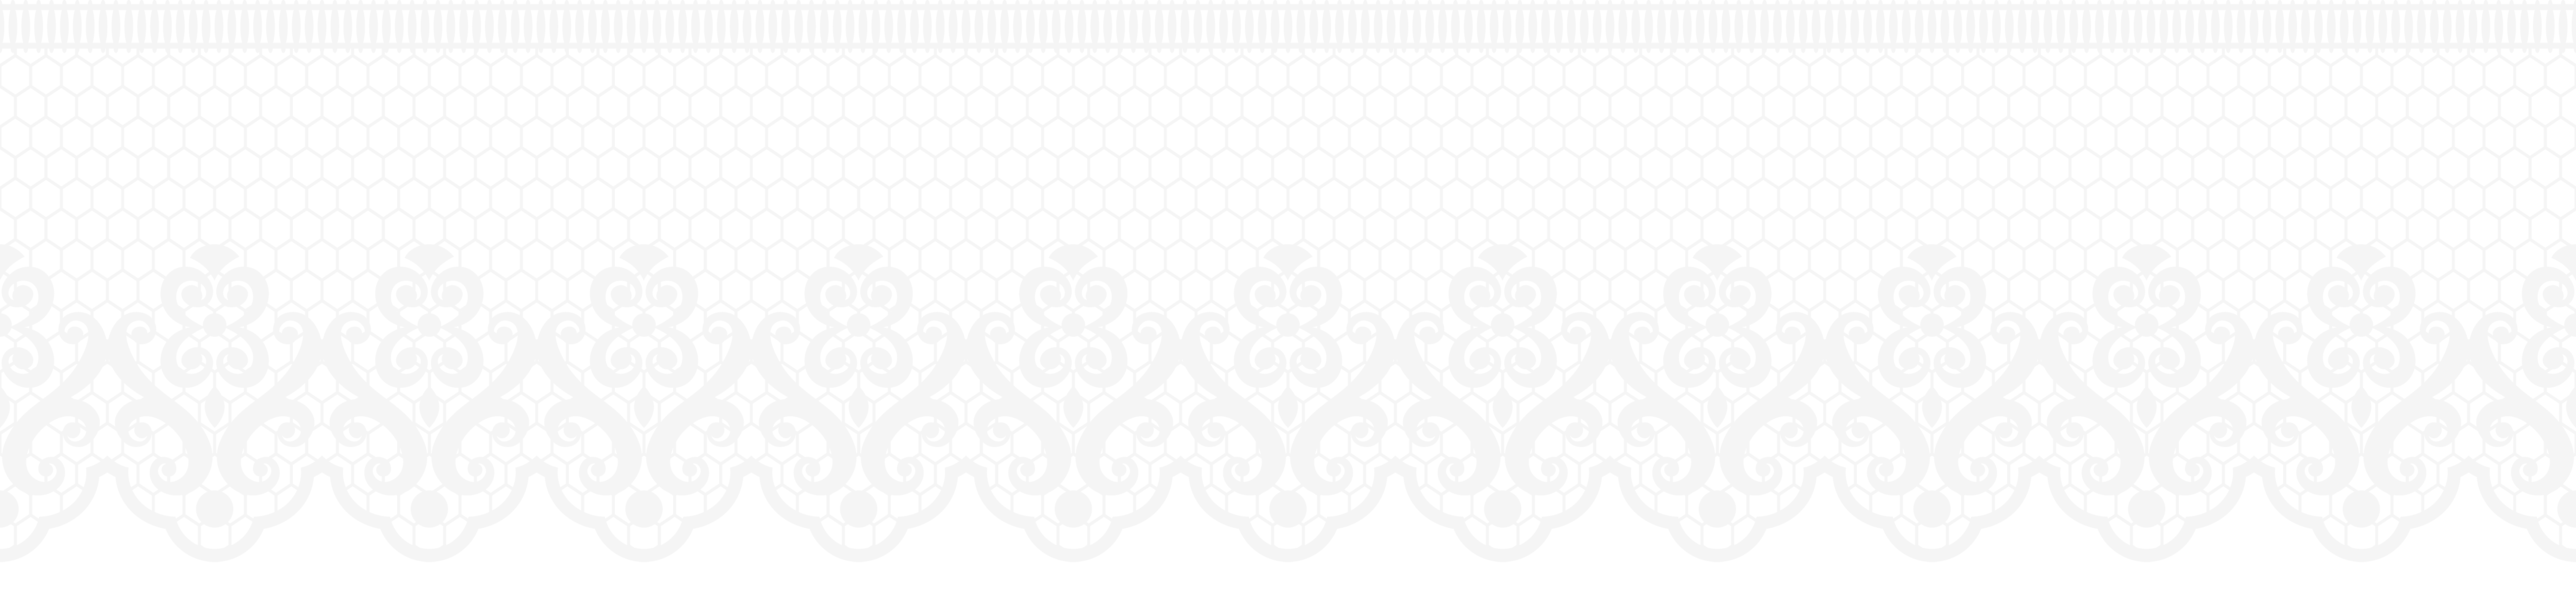 Black lace border png. And white product pattern